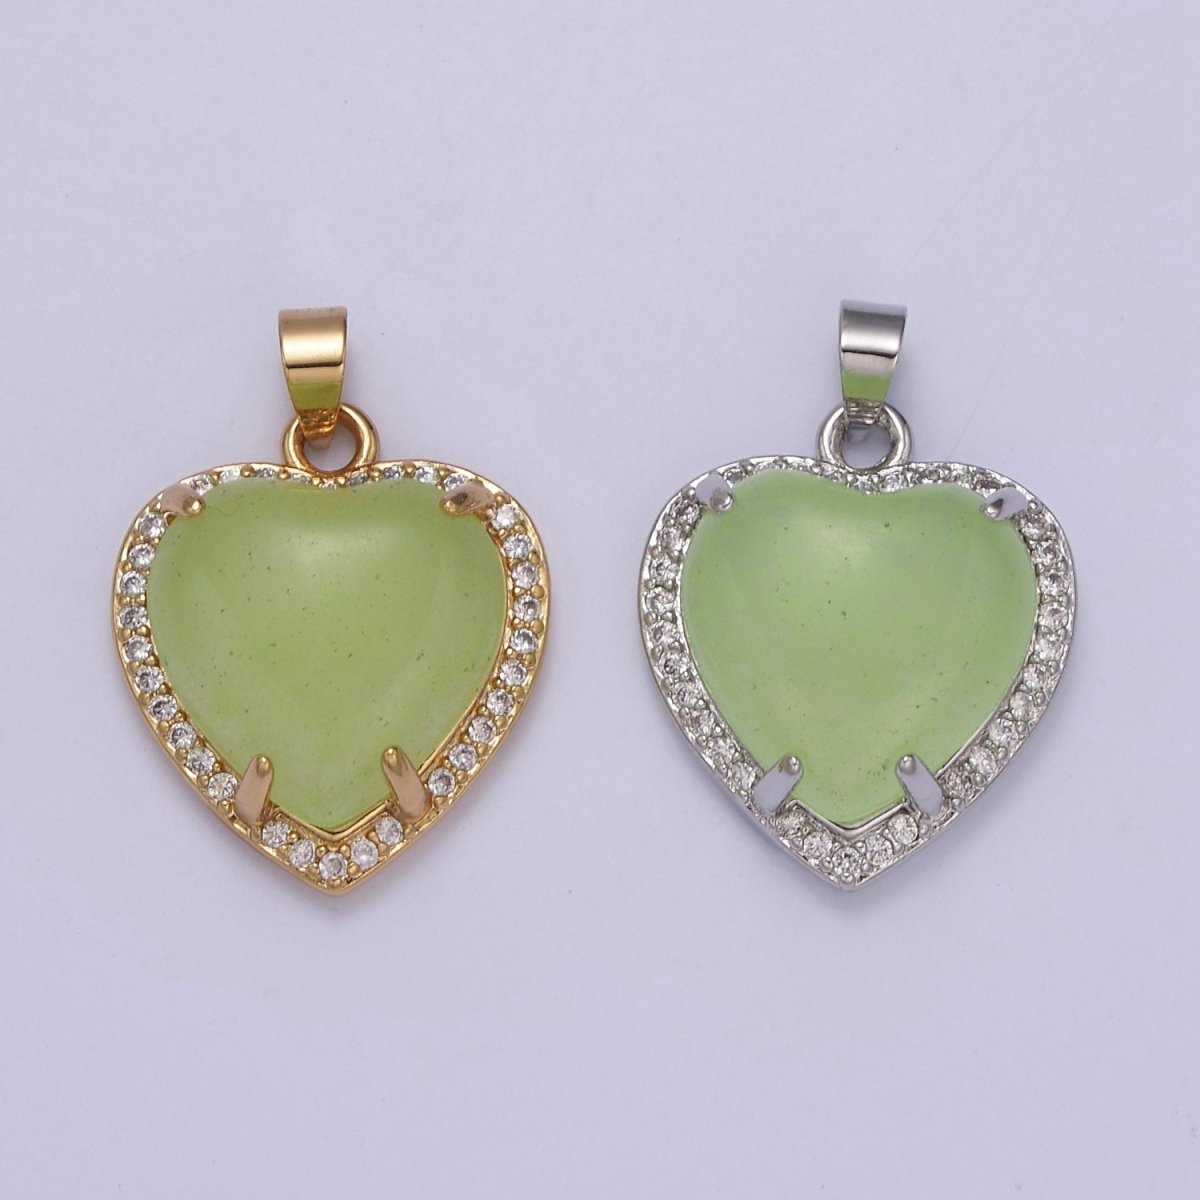 Puffy Heart Light Green Oval Lucky jade pendant Drop Charm for Necklace W-647 W-648 - DLUXCA